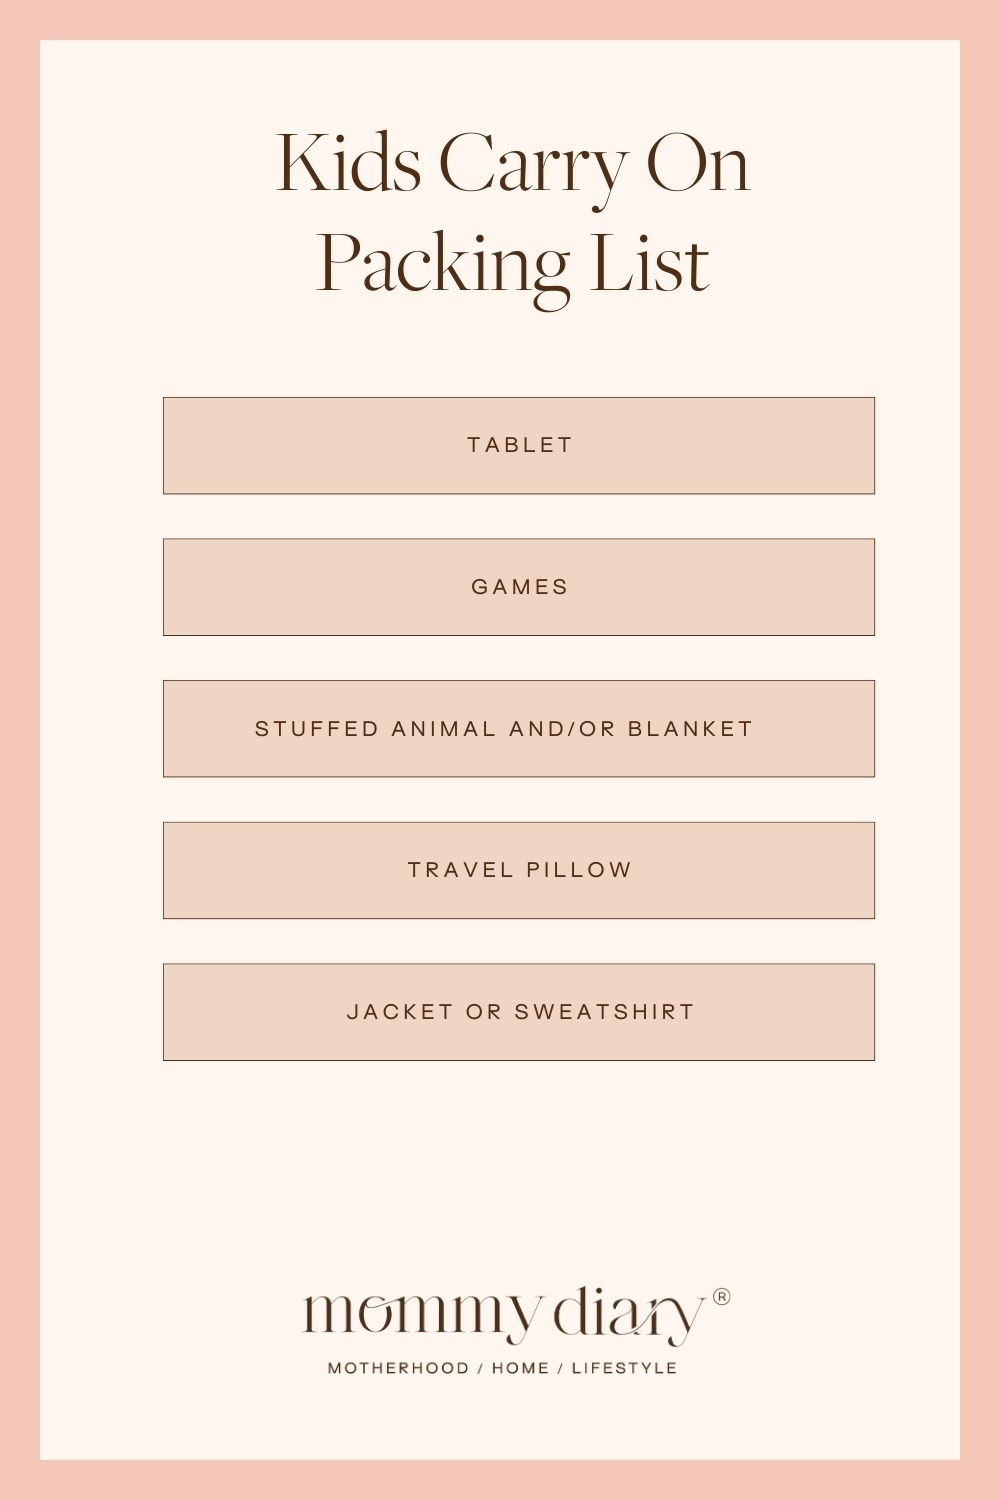 Kids Travel Carry On Packing List